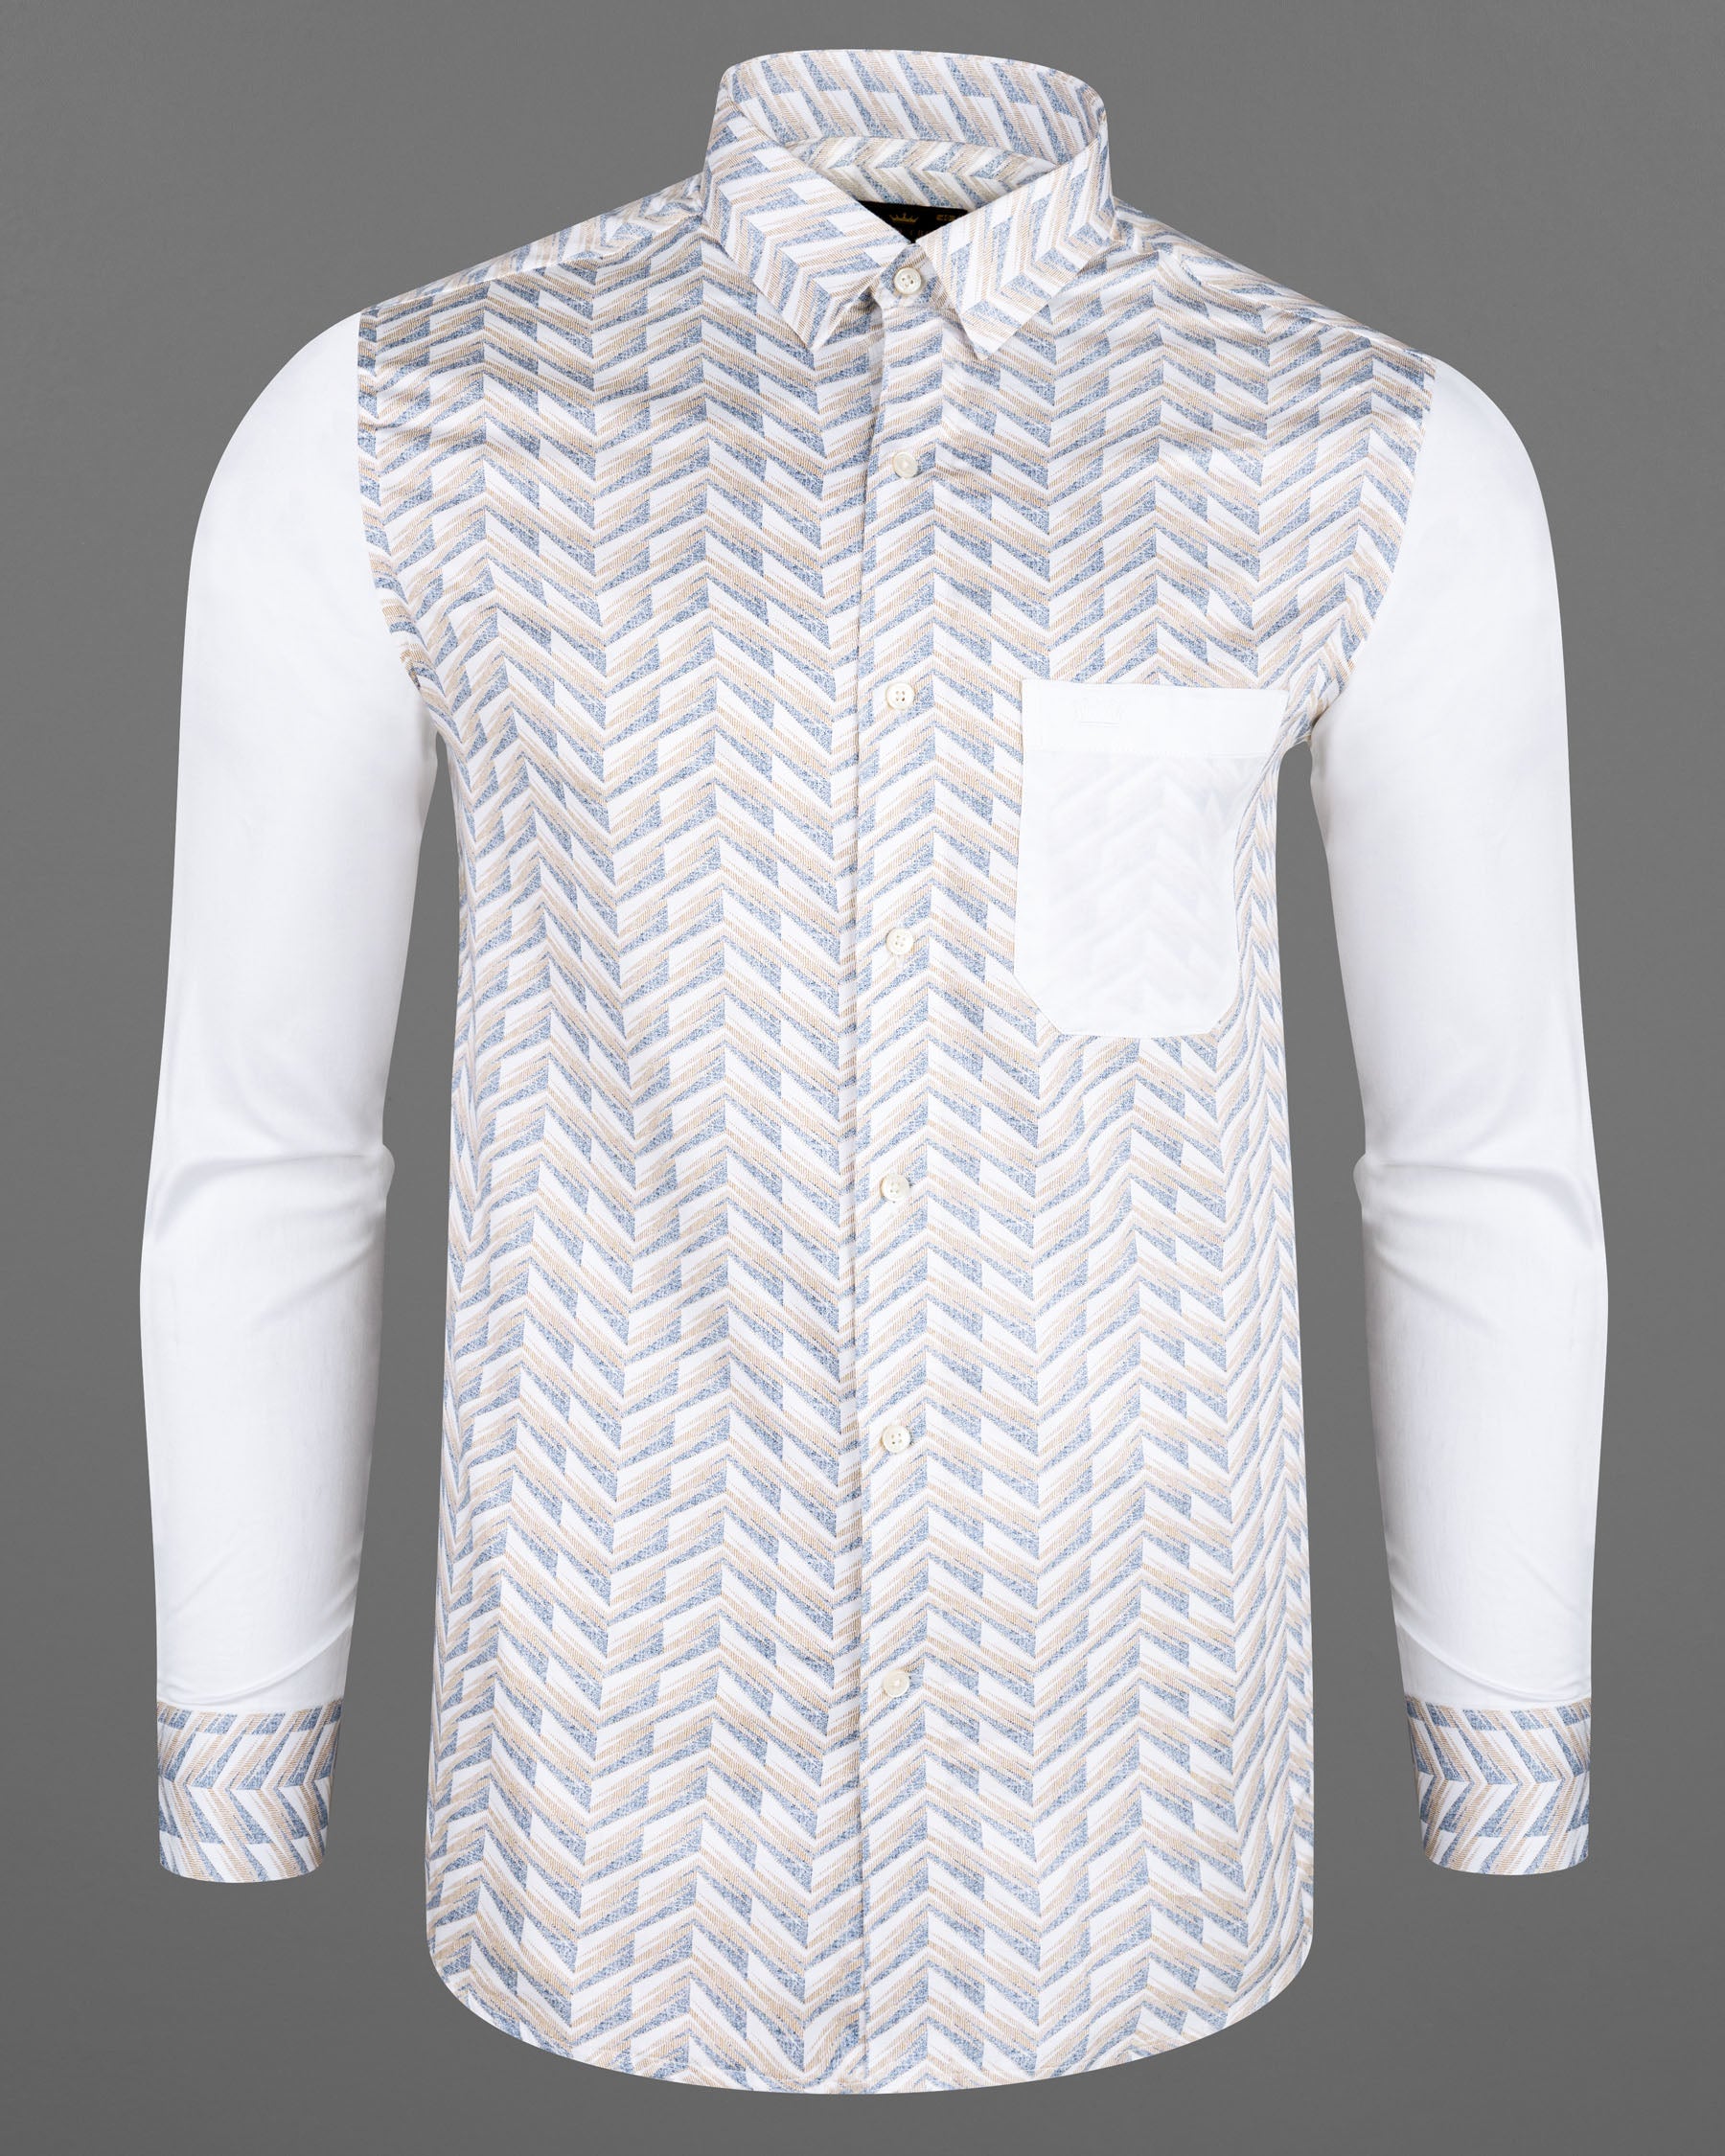 Mischka Gray and Mandys Brown Printed with Bright White Sleeves Super Soft Premium Cotton Designer Shirt 7083-P138-38,7083-P138-38,7083-P138-39,7083-P138-39,7083-P138-40,7083-P138-40,7083-P138-42,7083-P138-42,7083-P138-44,7083-P138-44,7083-P138-46,7083-P138-46,7083-P138-48,7083-P138-48,7083-P138-50,7083-P138-50,7083-P138-52,7083-P138-52